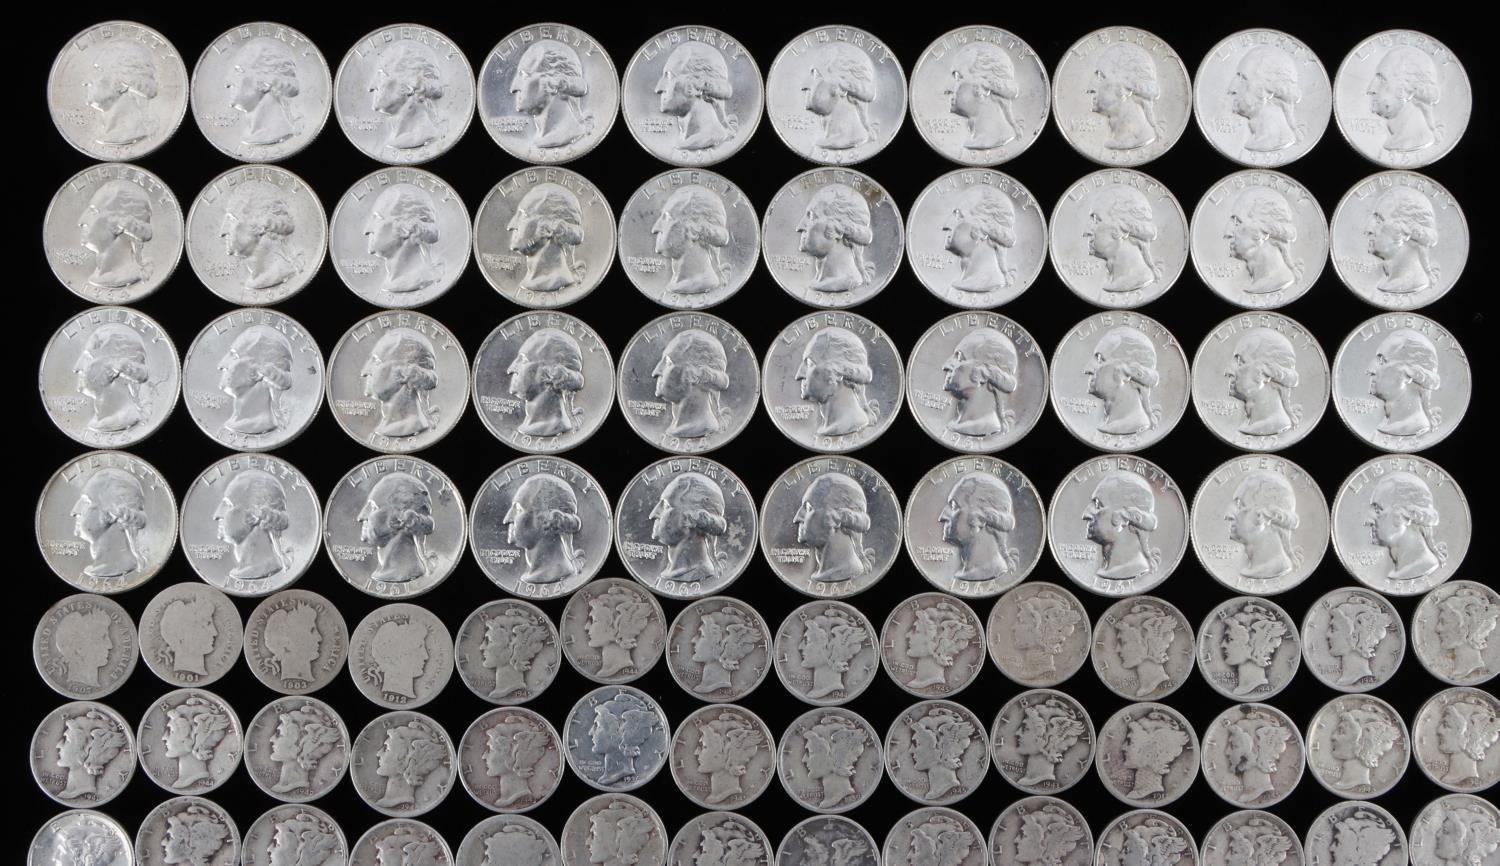 $18 FACE 90% SILVER COIN QUARTERS AND DIMES